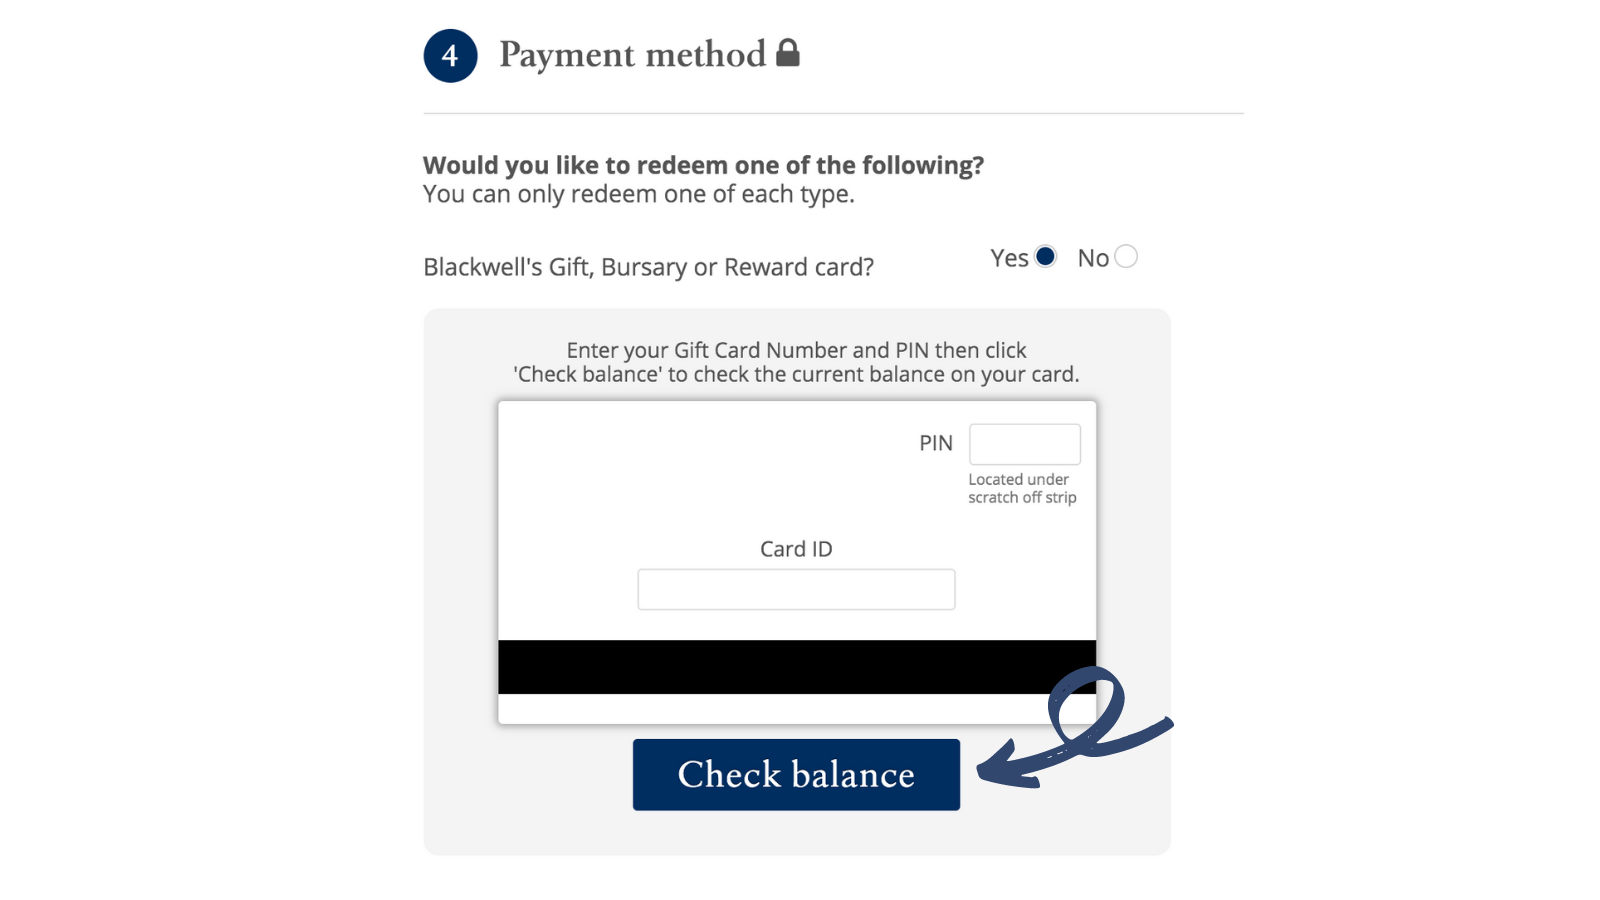 Payment_method_2.png